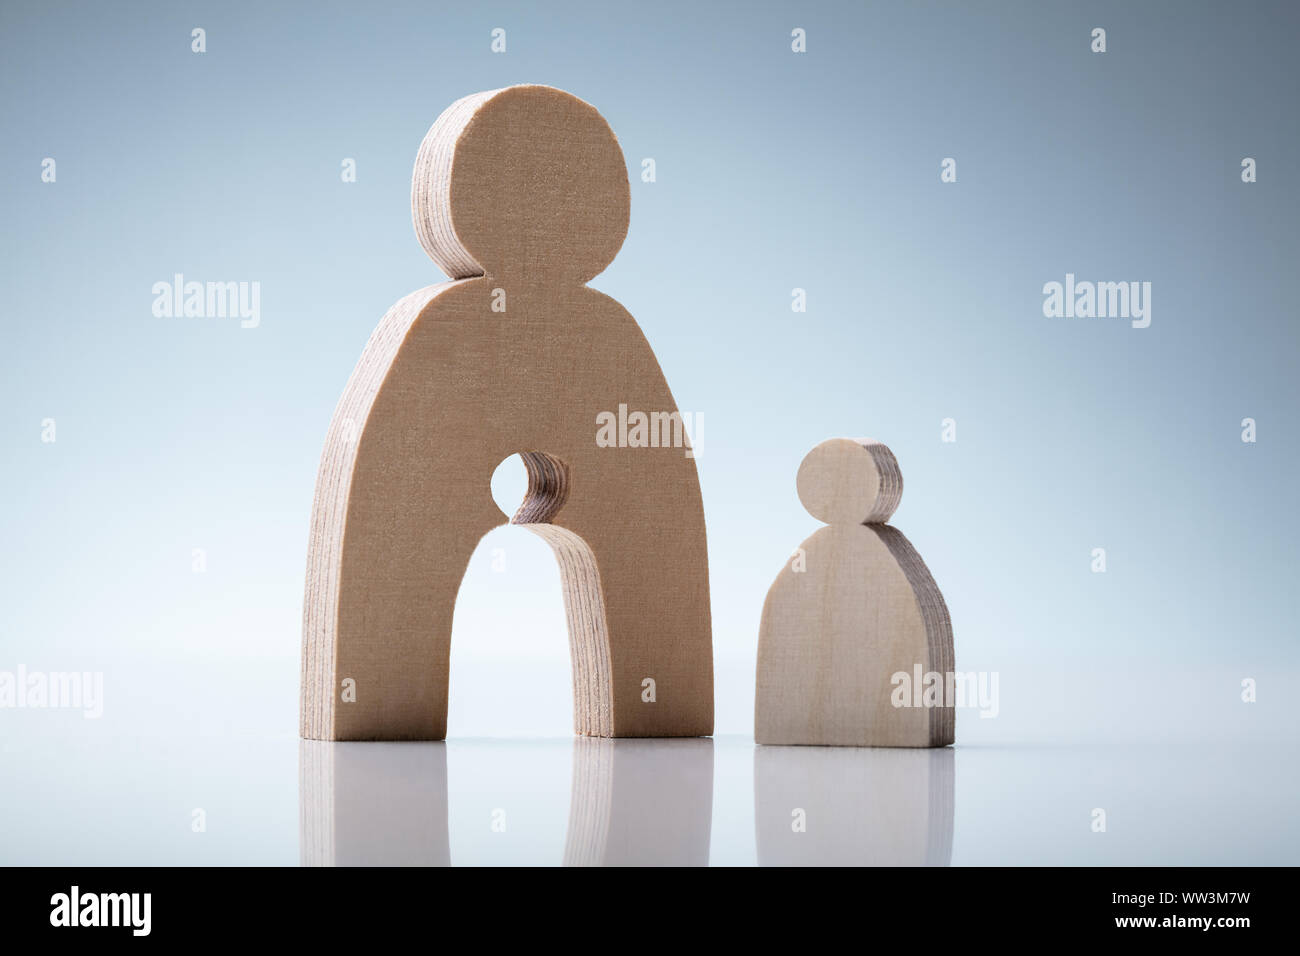 Wooden Figures Showing Mother And Child Concept Over Reflective Desk Stock Photo